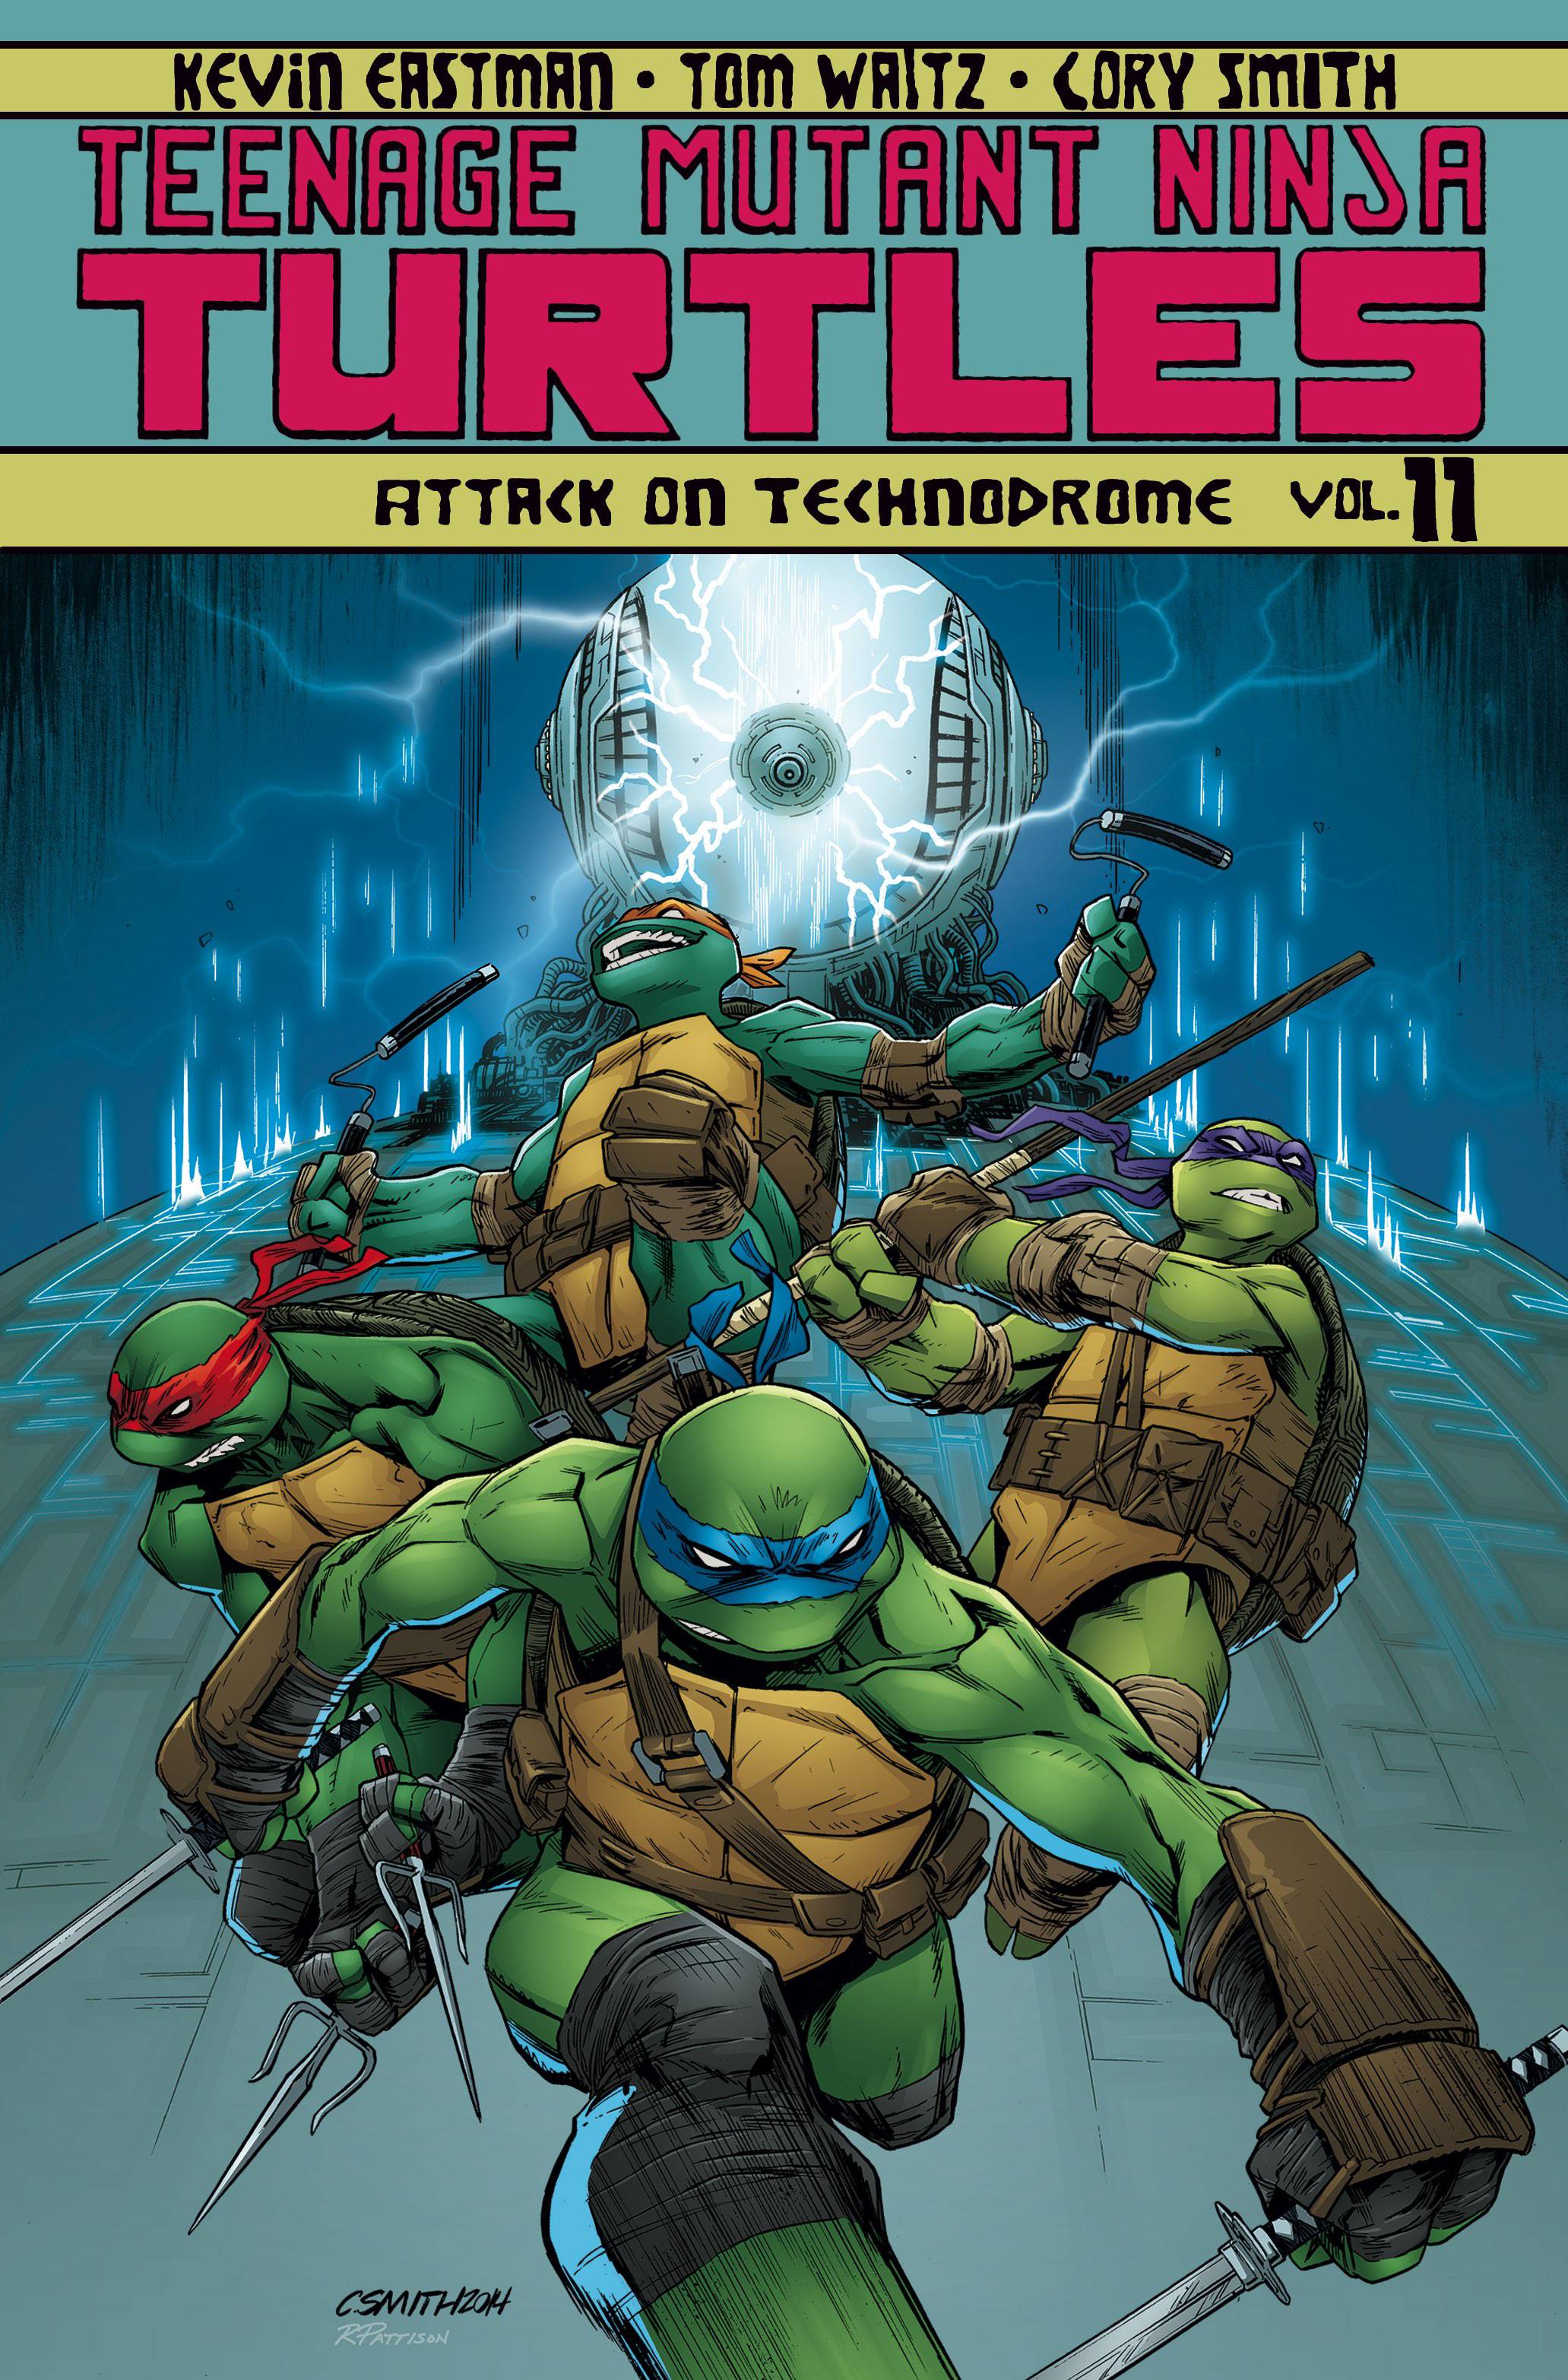 TMNT ONGOING TP VOL 11 ATTACK ON TECHNODROME